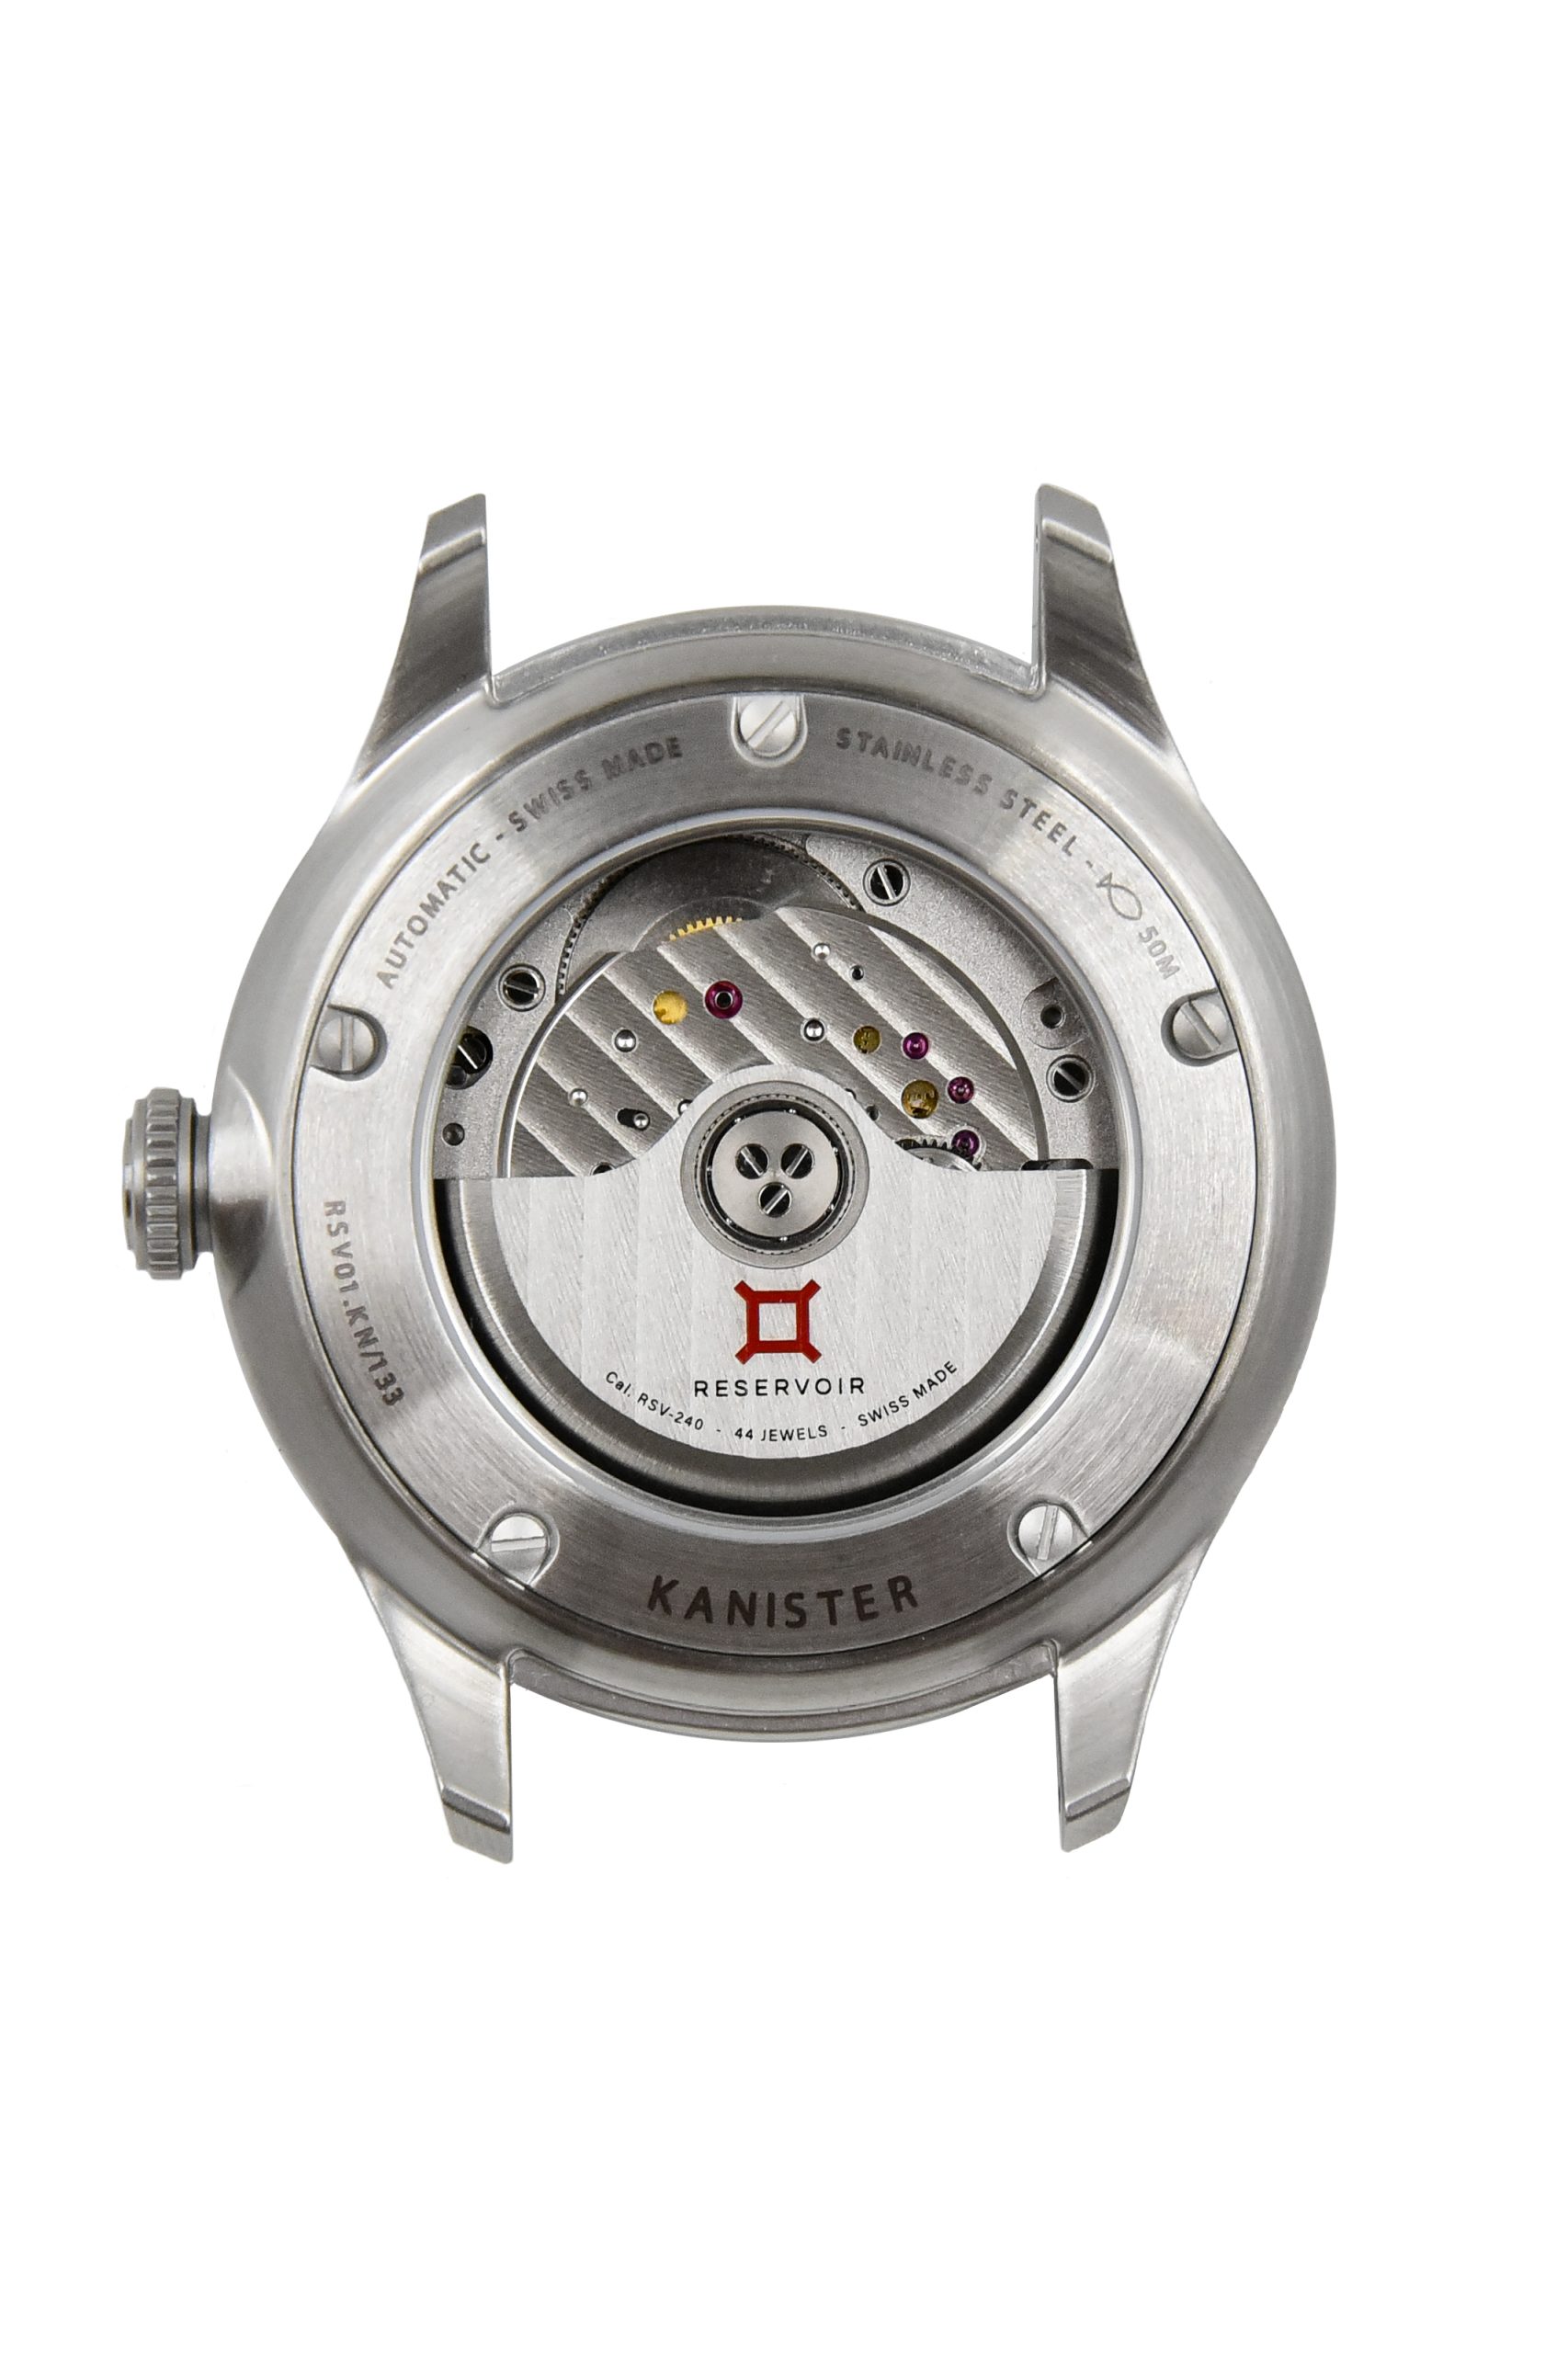 Back view of Reservoir Kanister watch case, showing automatic movement and "Swiss Made" markings.